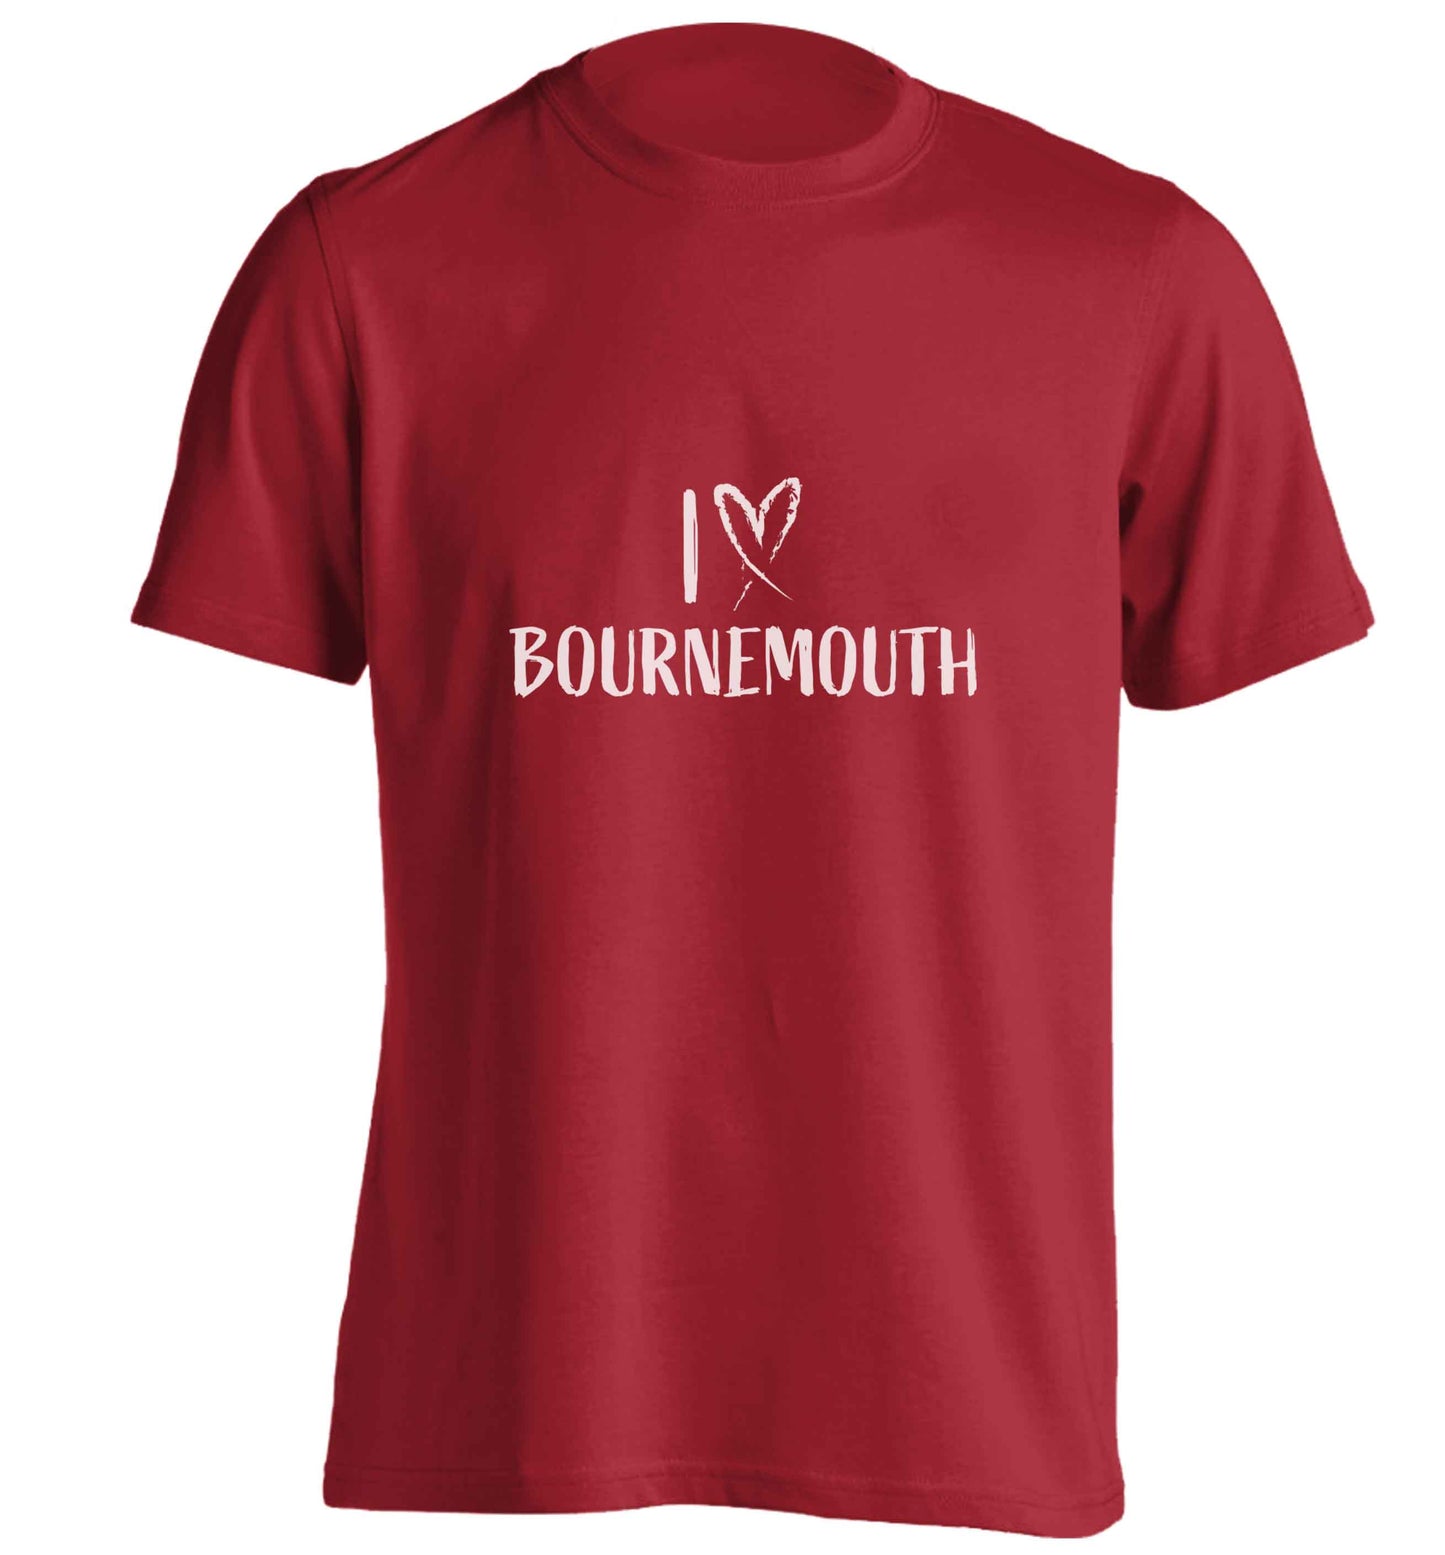 I love Bournemouth adults unisex red Tshirt 2XL